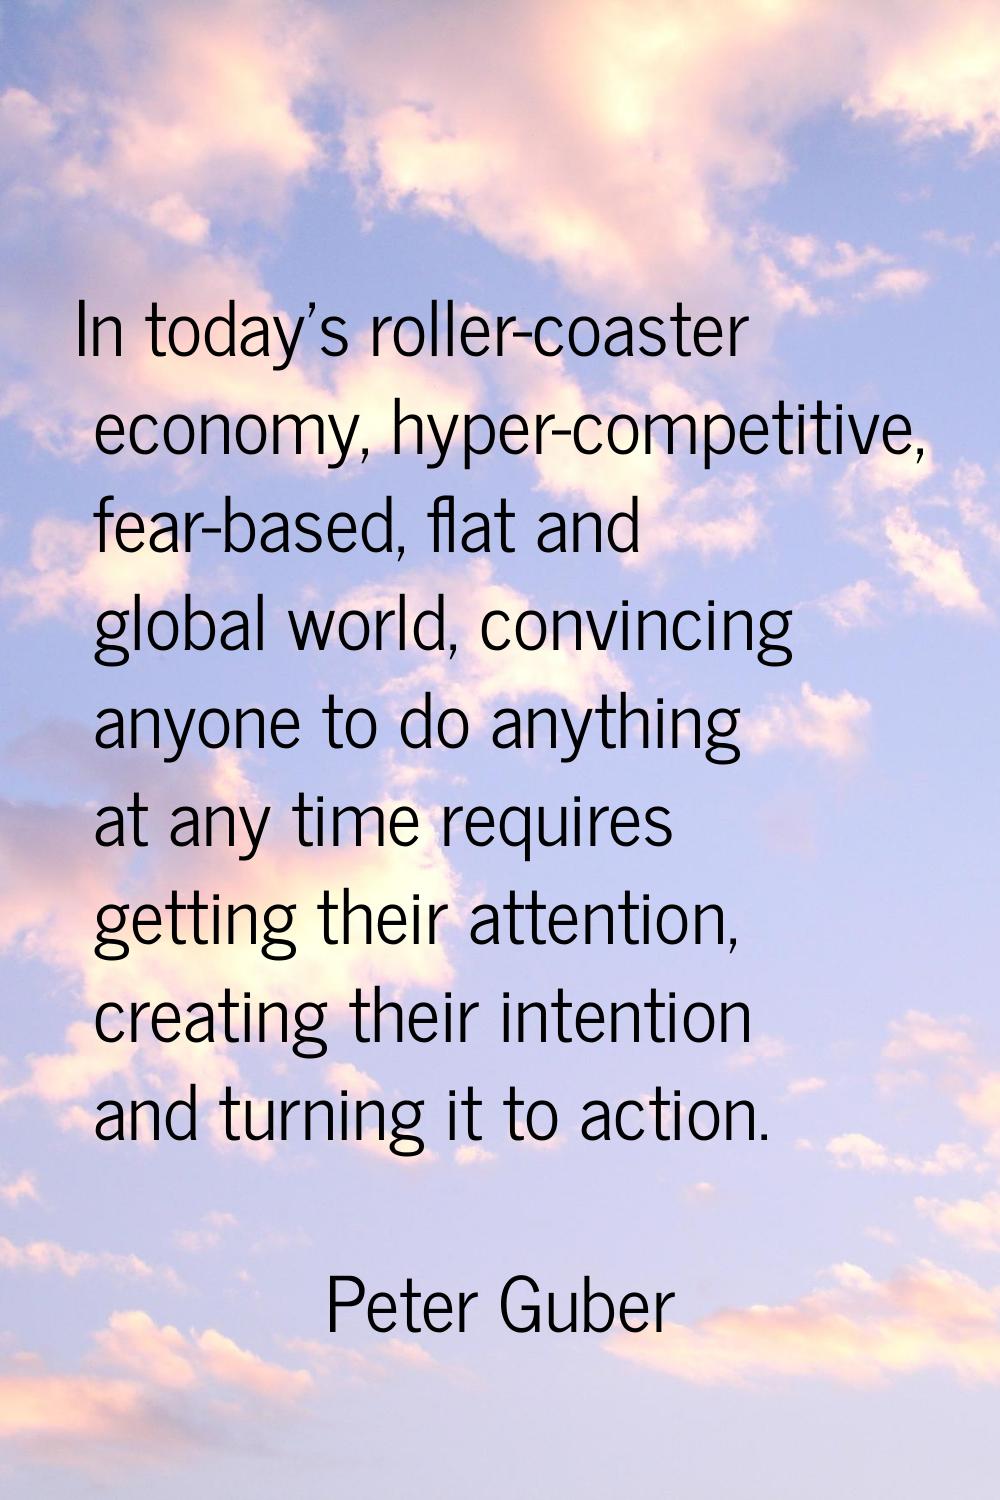 In today's roller-coaster economy, hyper-competitive, fear-based, flat and global world, convincing